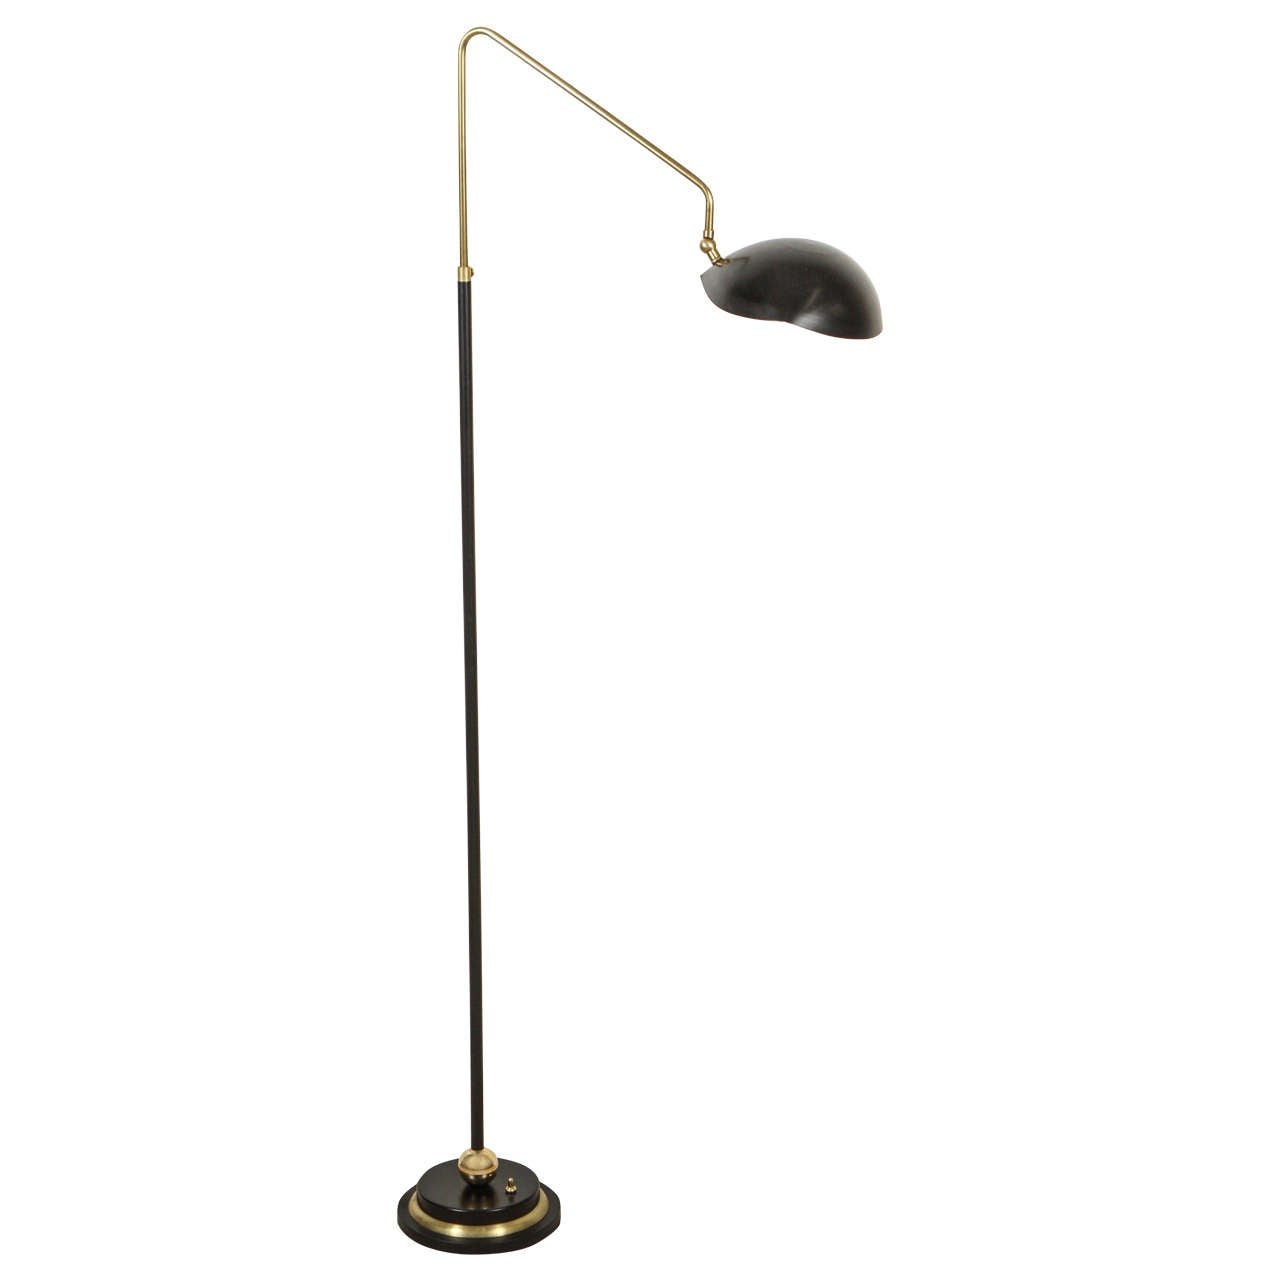 "J" Arm Floor Lamp by Jason Koharik for Collected by